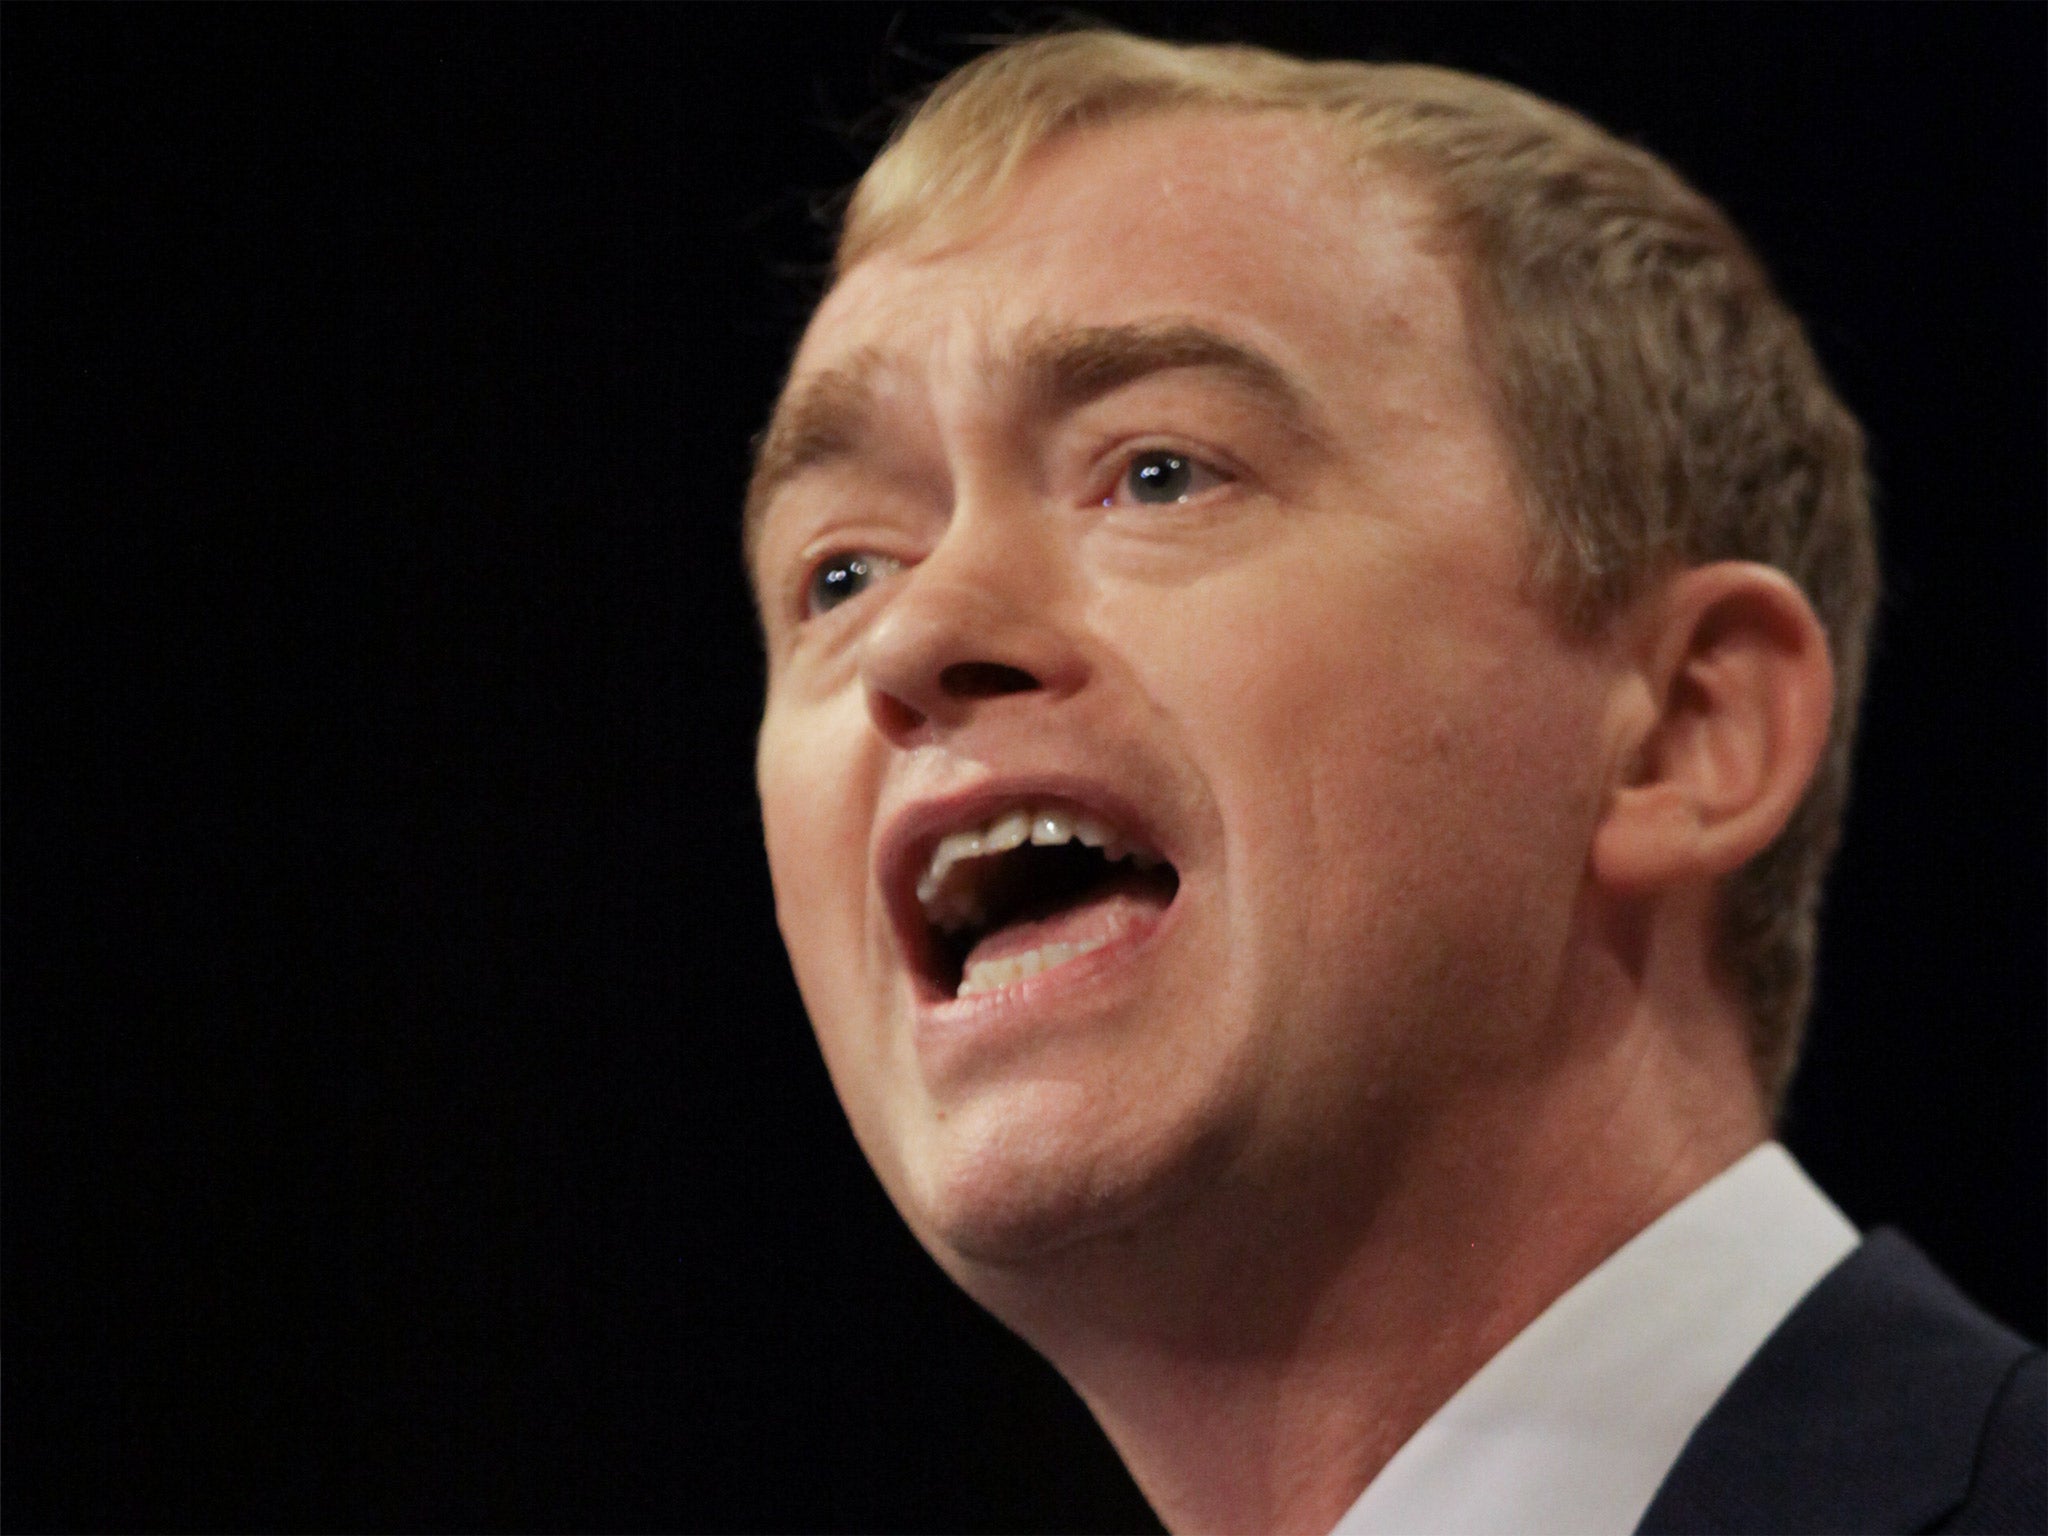 Lib Dem leader Tim Farron said the case raises ‘serious questions’ about the industry (Getty)